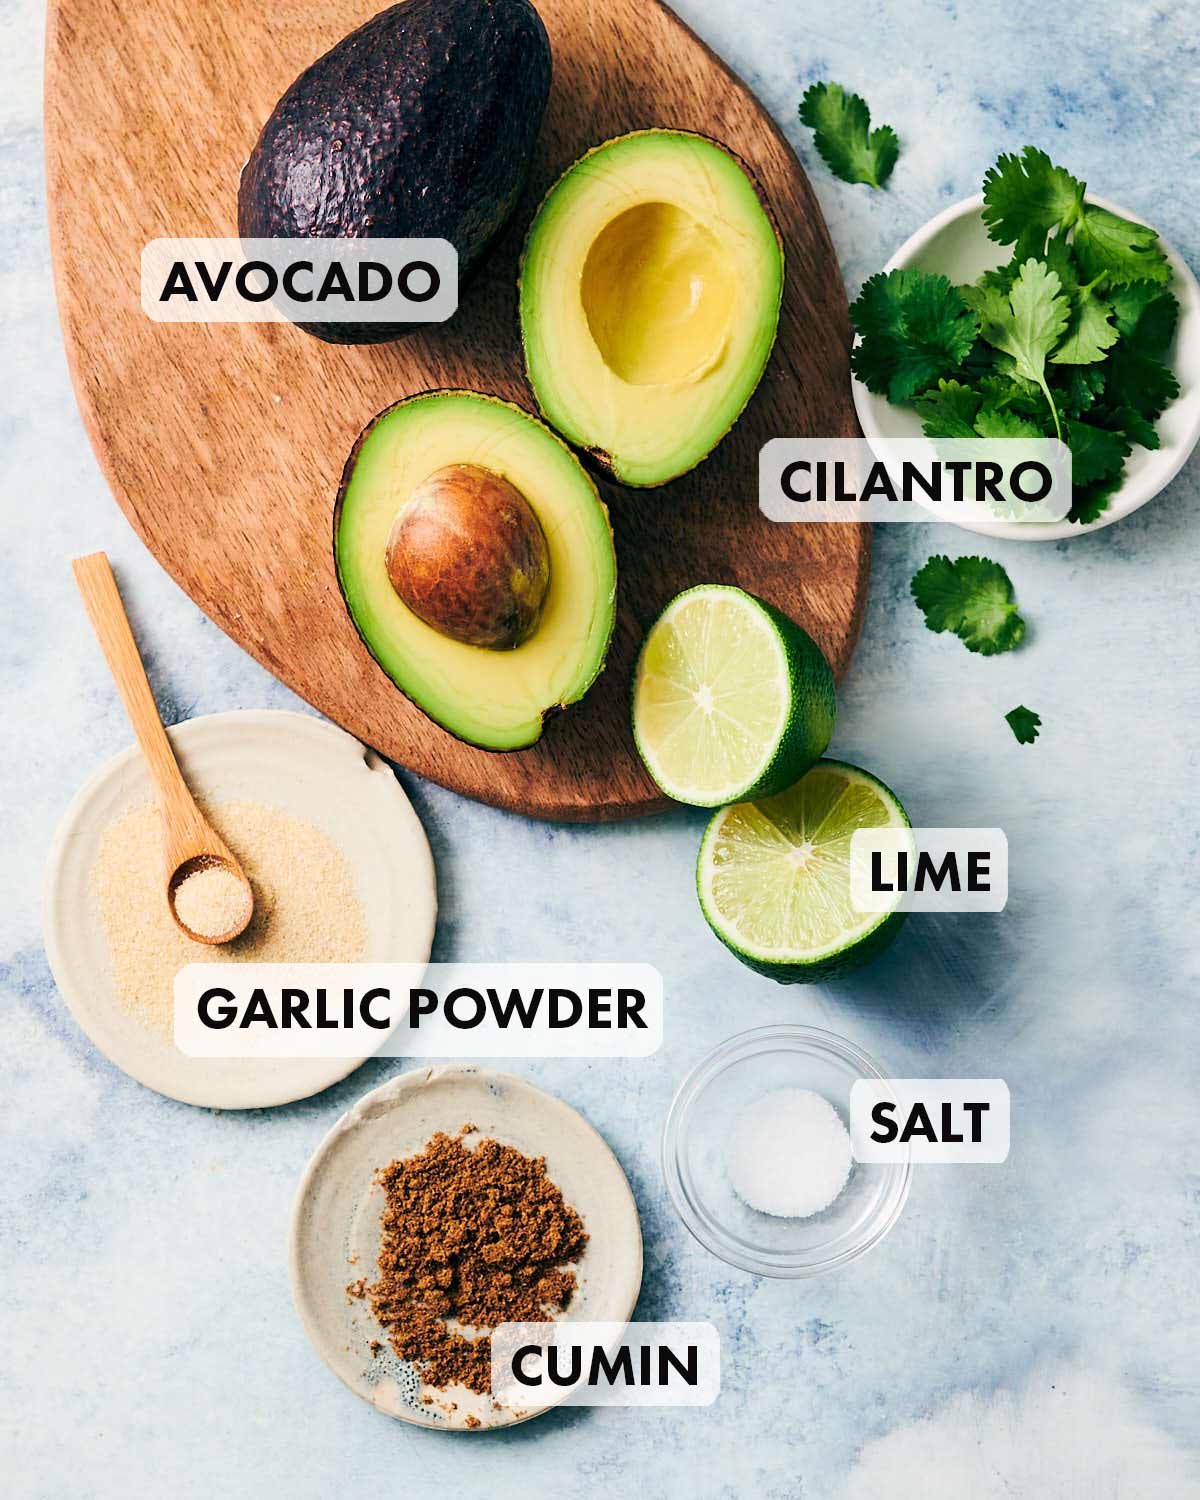 Ingredients to make vegan guacamole without tomatoes.